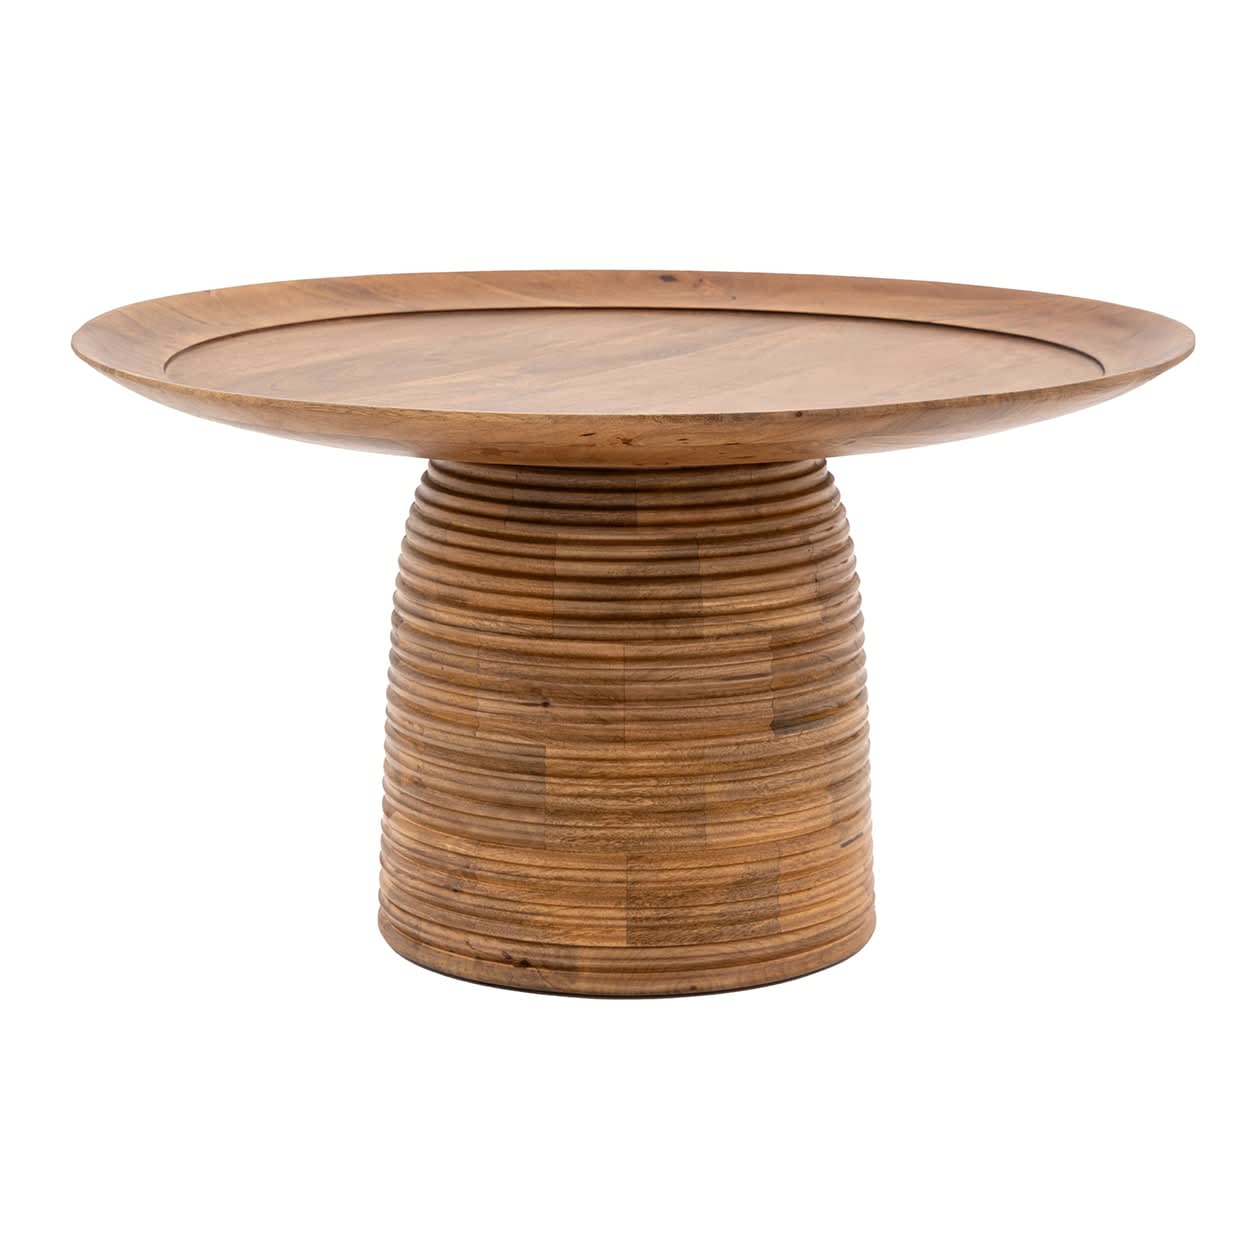 Belmonte Wooden Coffee Table by Gallery Direct